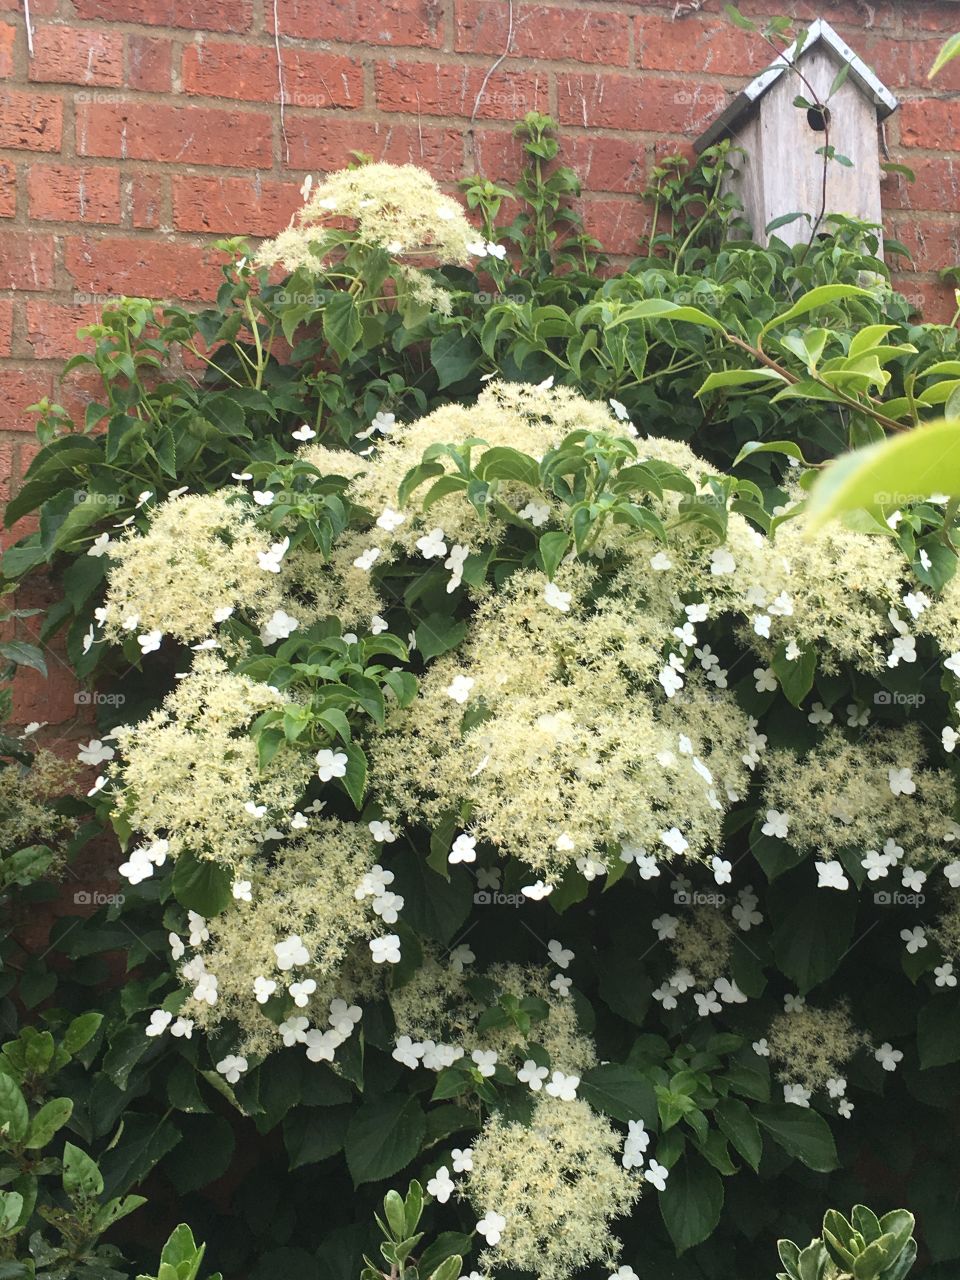 Pretty white hydrangea bush growing up a brick wall with a wooden bird box house next to it